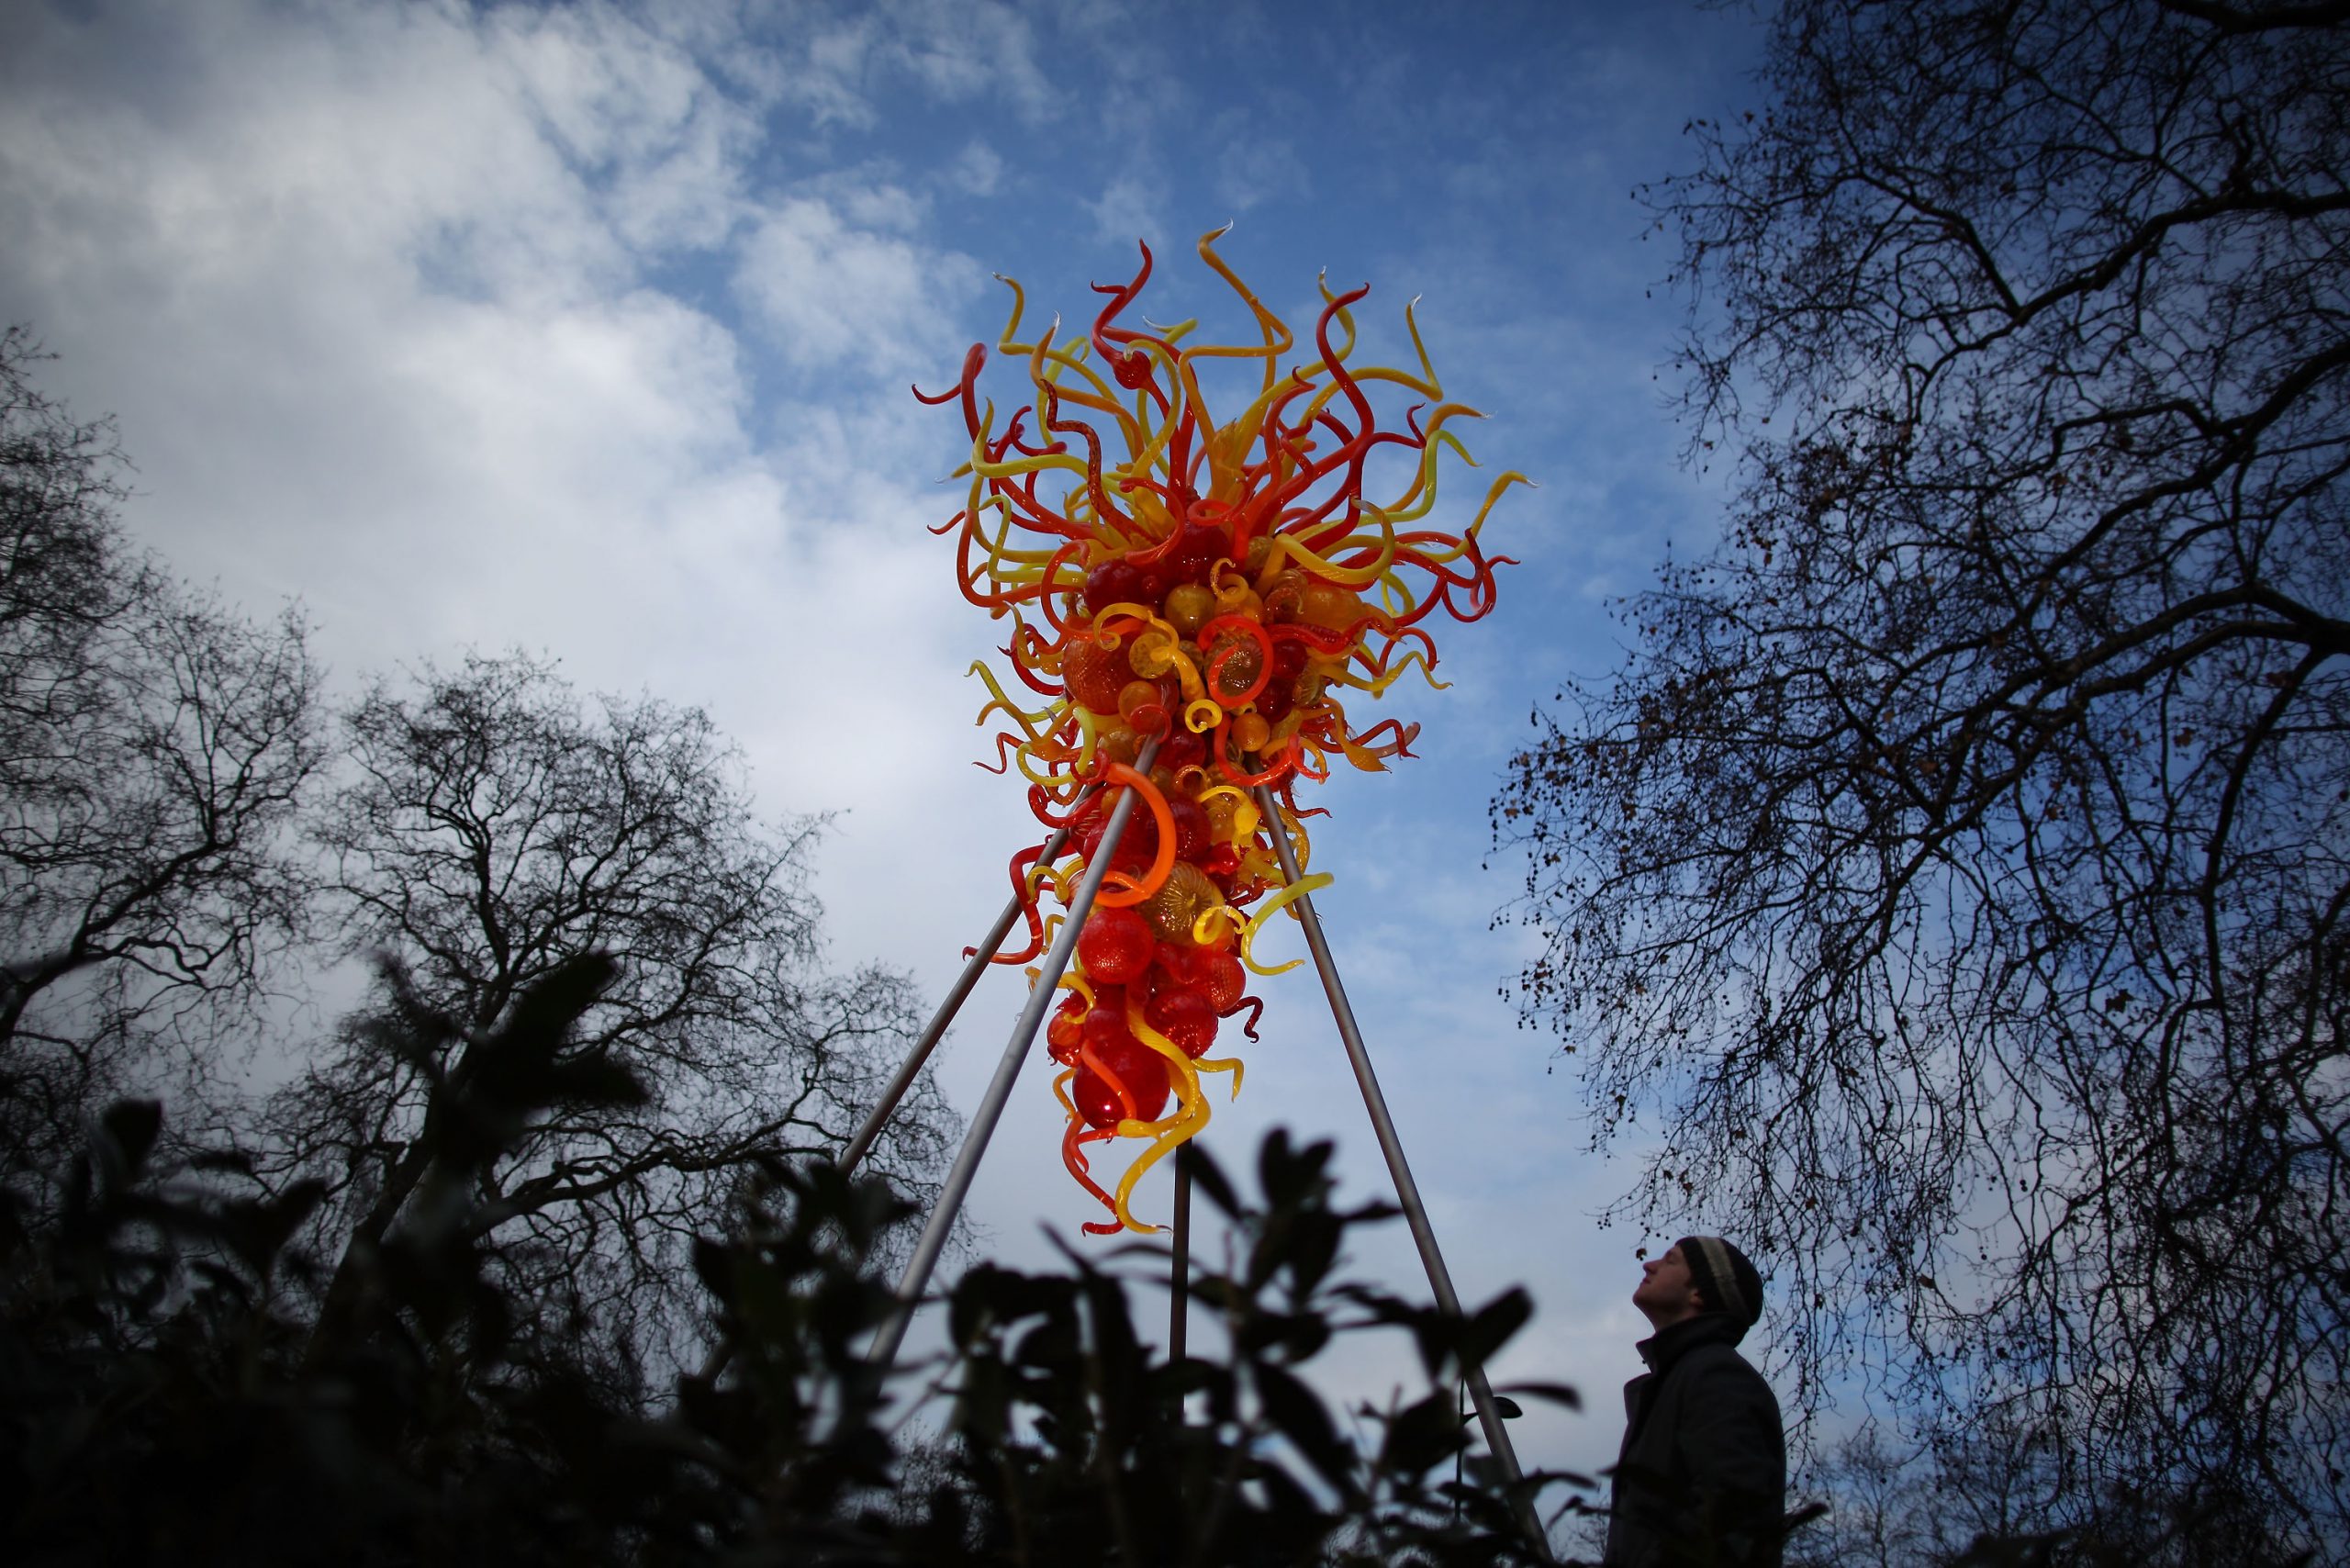 Dale Chihuly photo 2